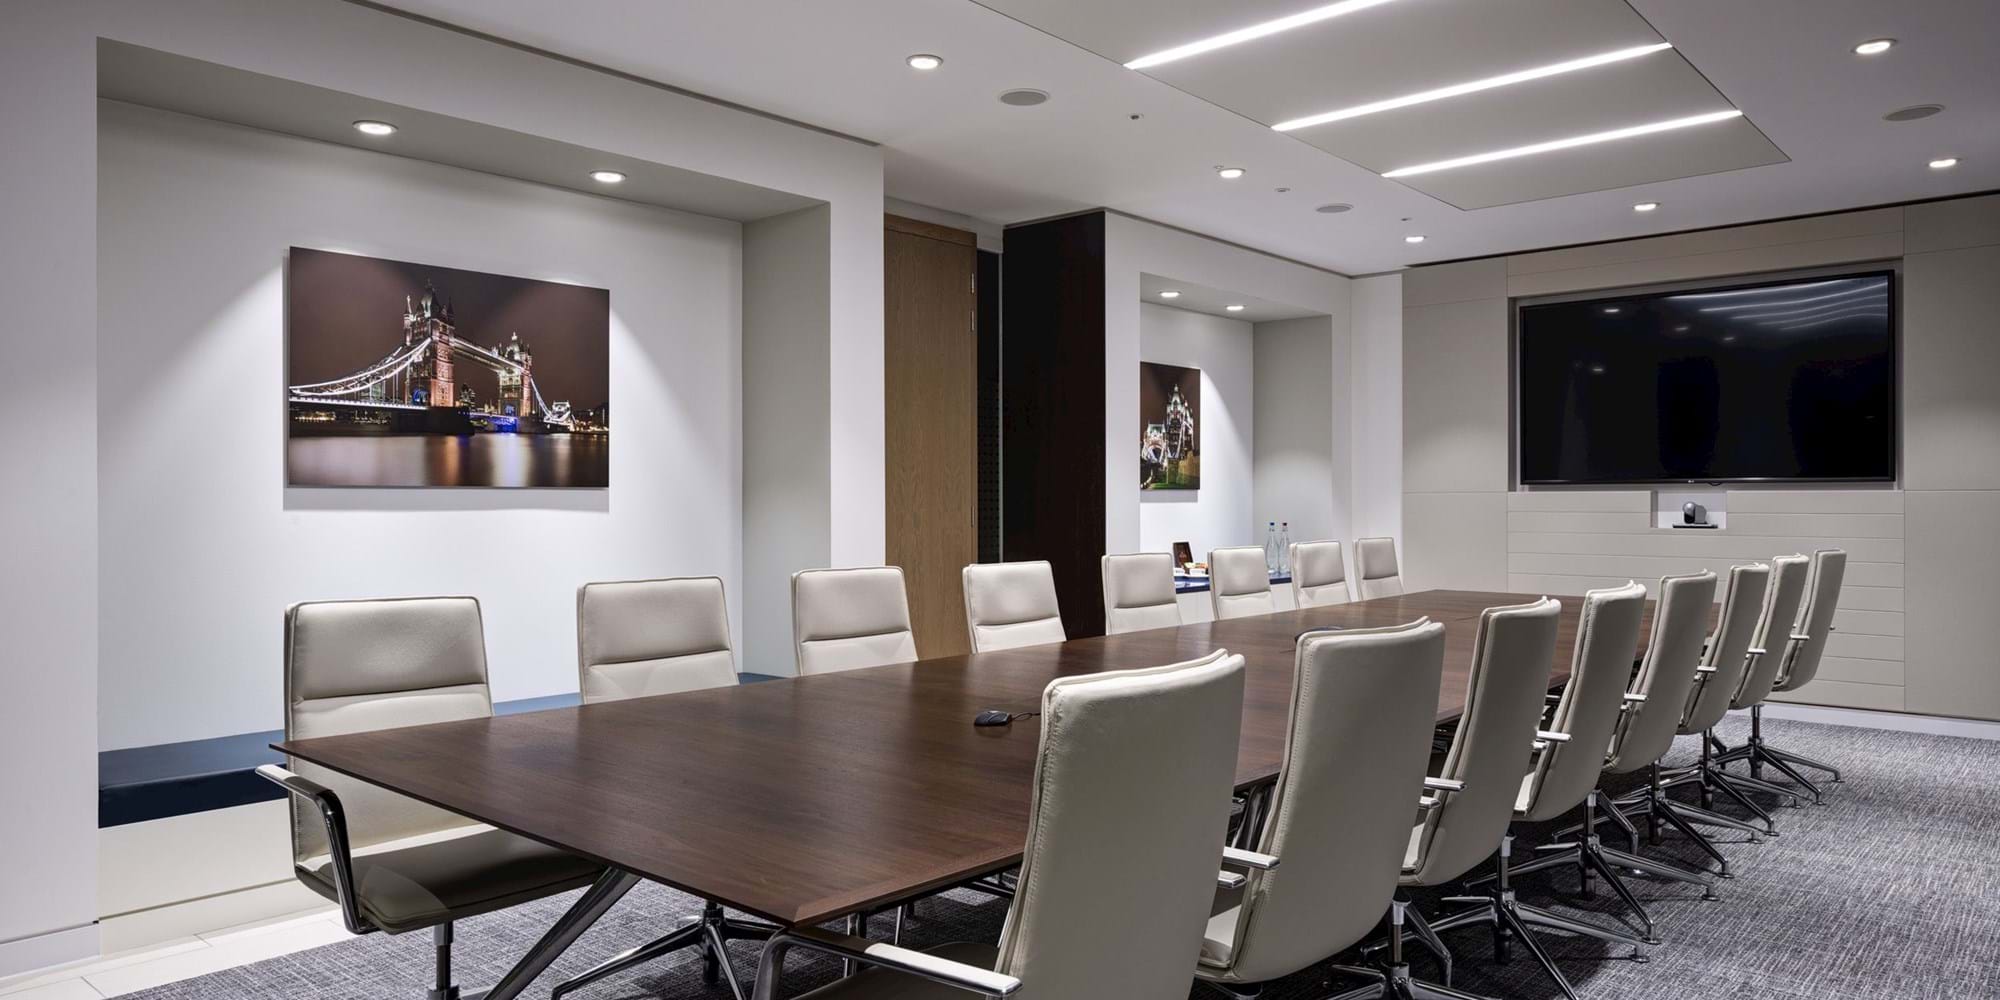 Modus Workspace office design, fit out and refurbishment - Sirius - Boardroom - Sirius 12 highres sRGB.jpg